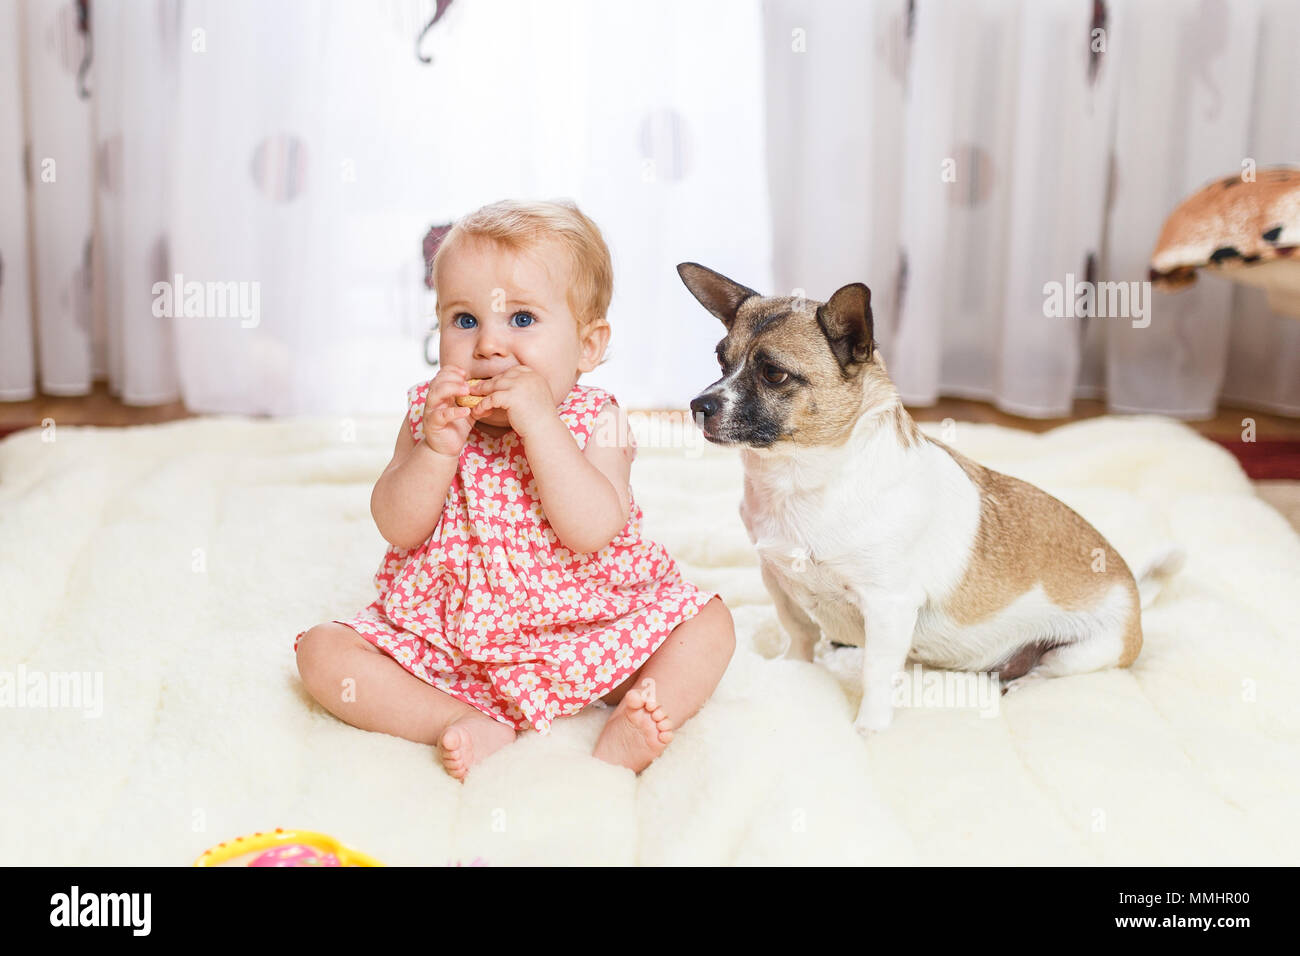 Little funny Caucasian girl the child sits at home on the floor on a light carpet with the best friend of the half-breed dog with spotty color and sho Stock Photo